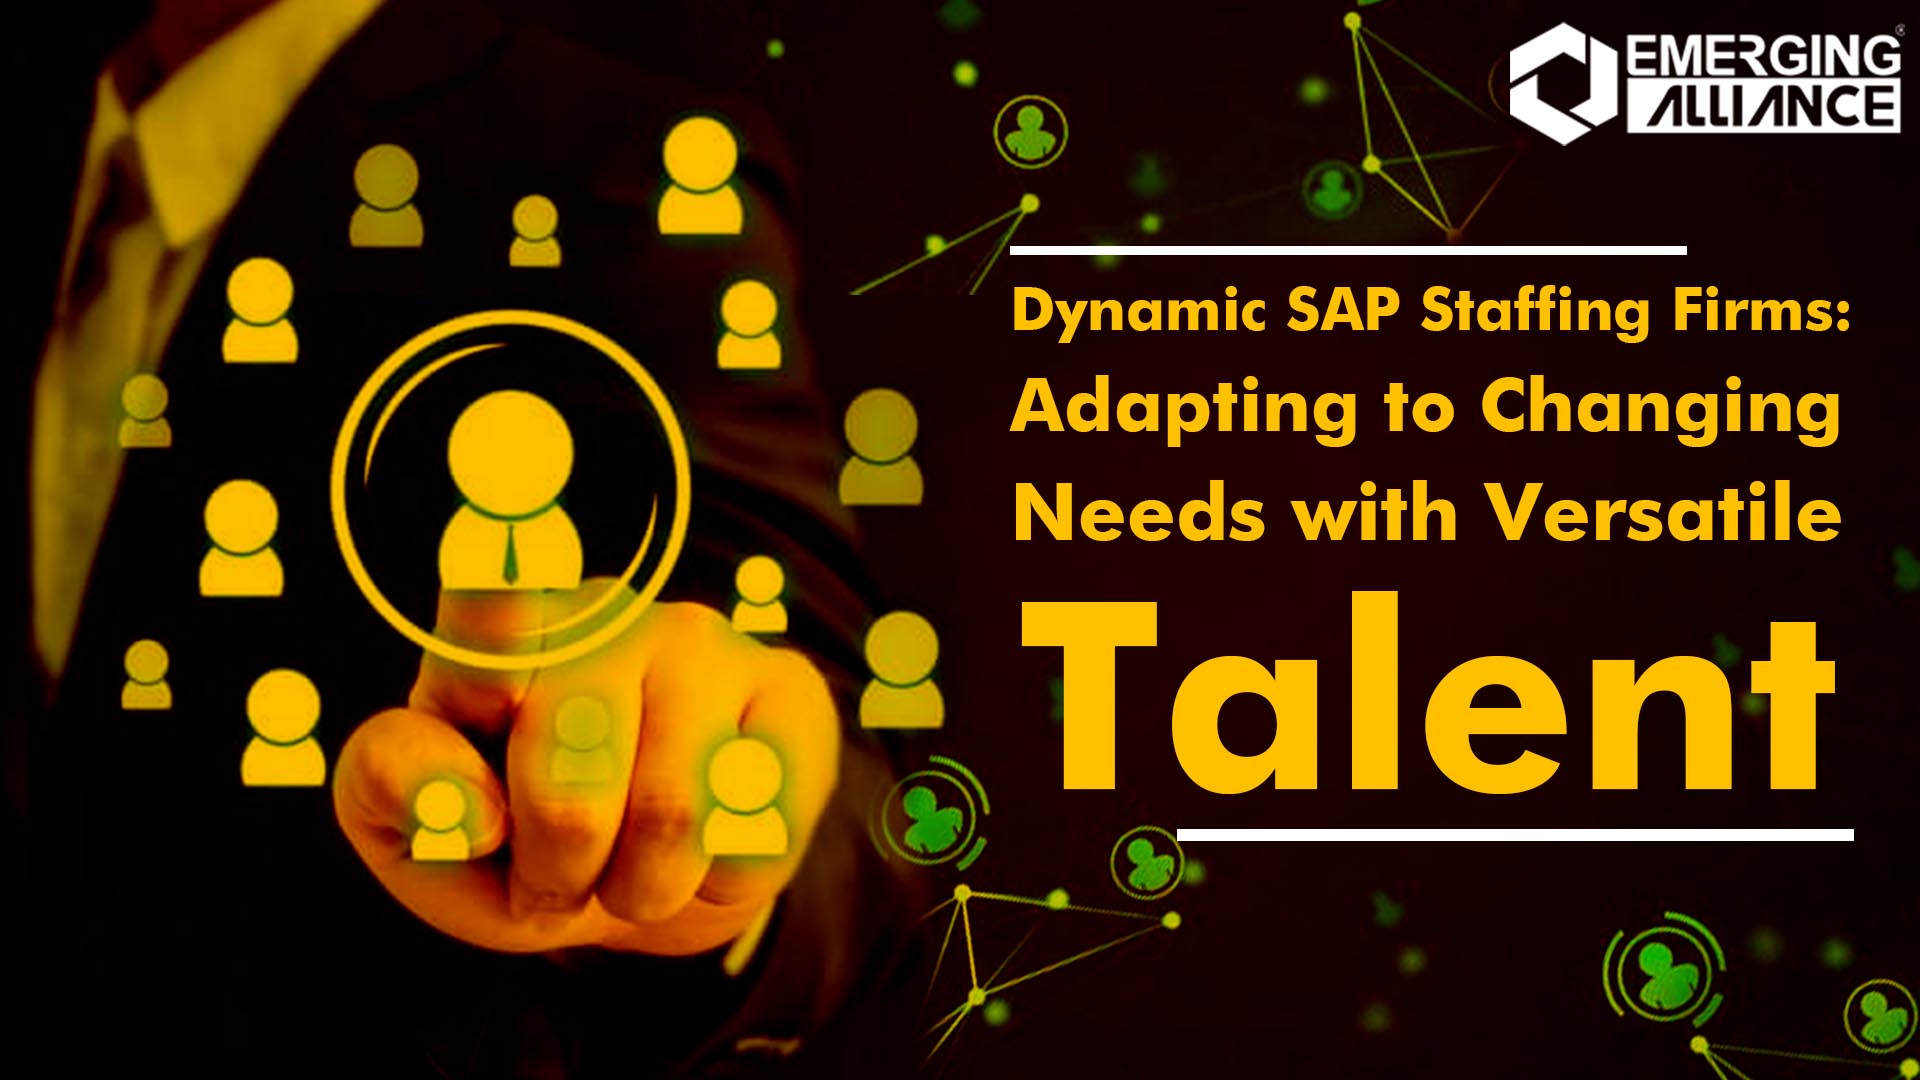 SAP Staffing with the Power of Versatile Talent